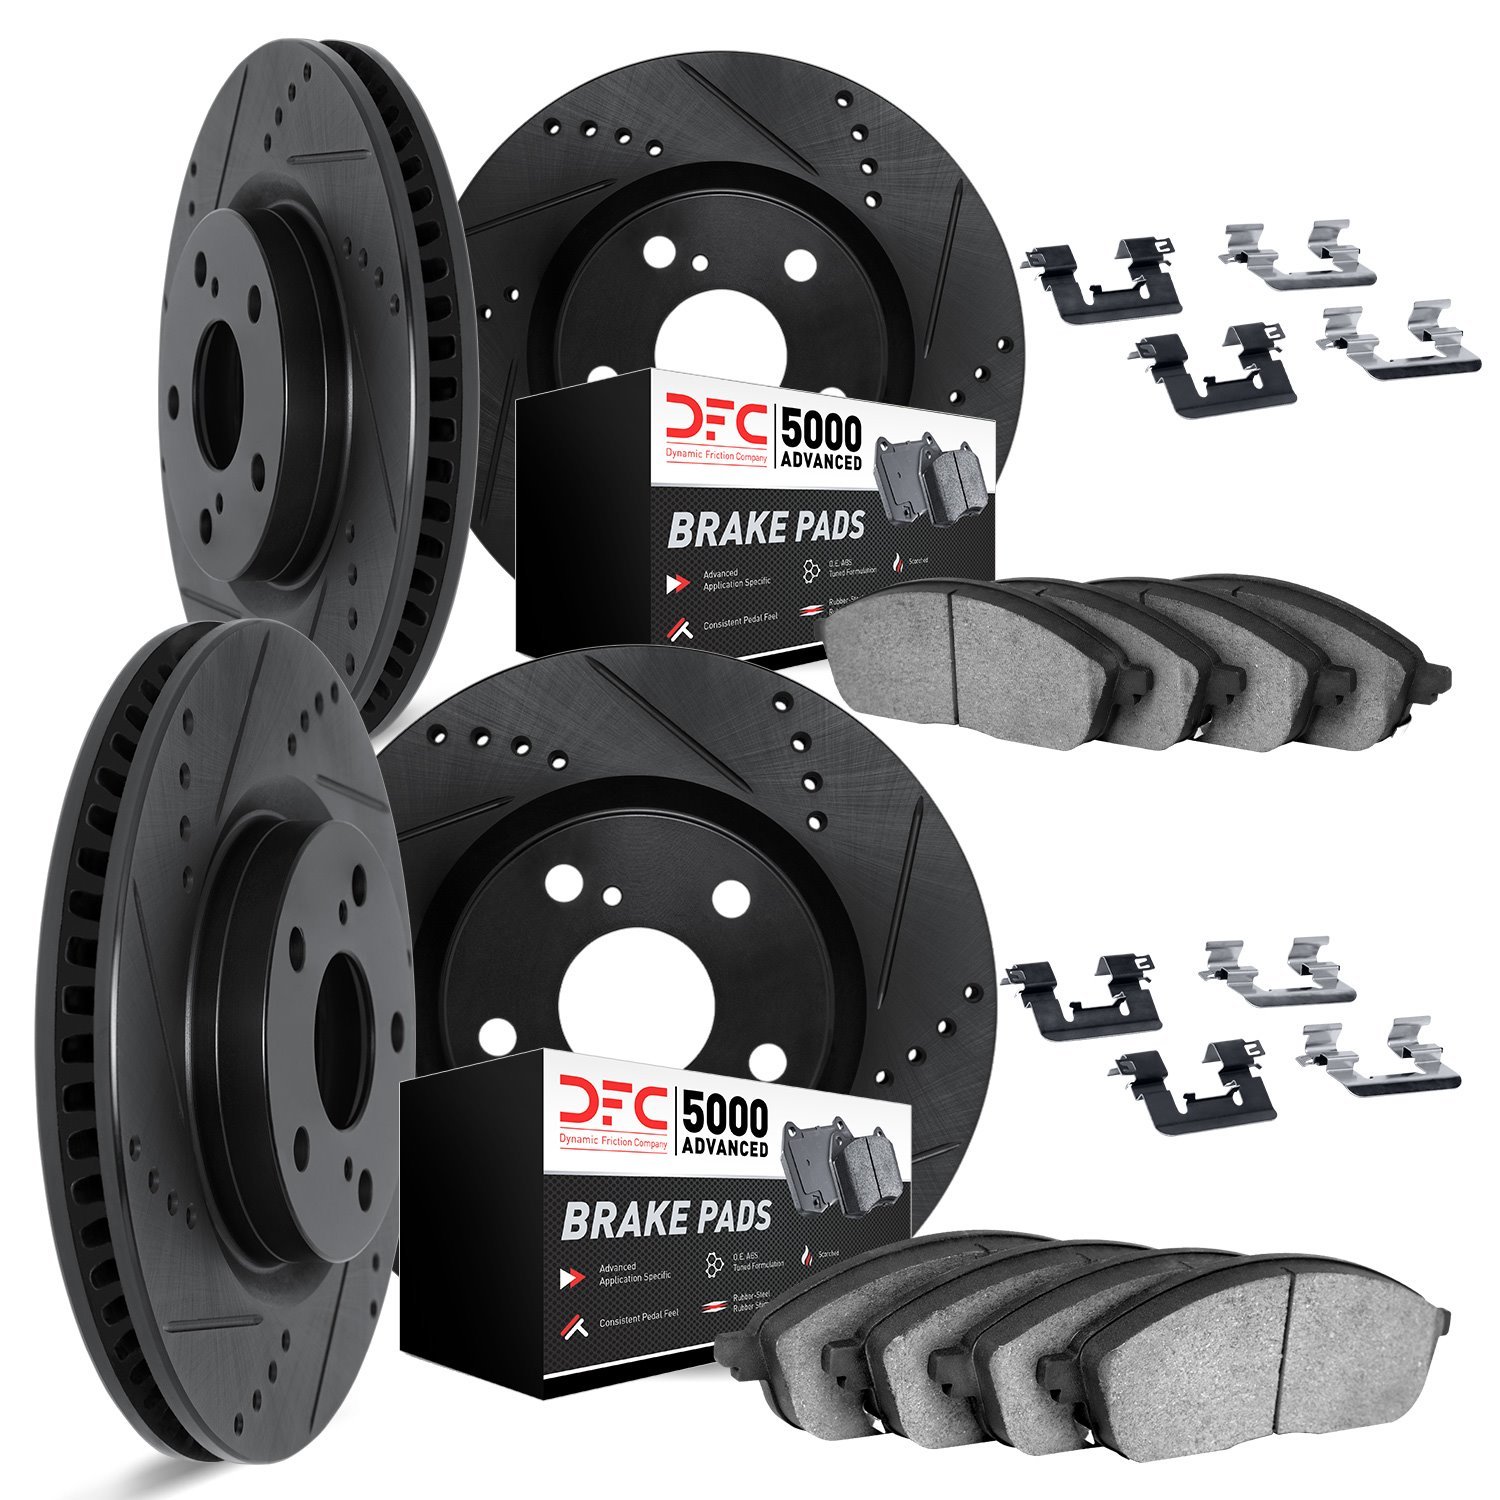 8514-31032 Drilled/Slotted Brake Rotors w/5000 Advanced Brake Pads Kit & Hardware [Black], 2011-2015 BMW, Position: Front and Re